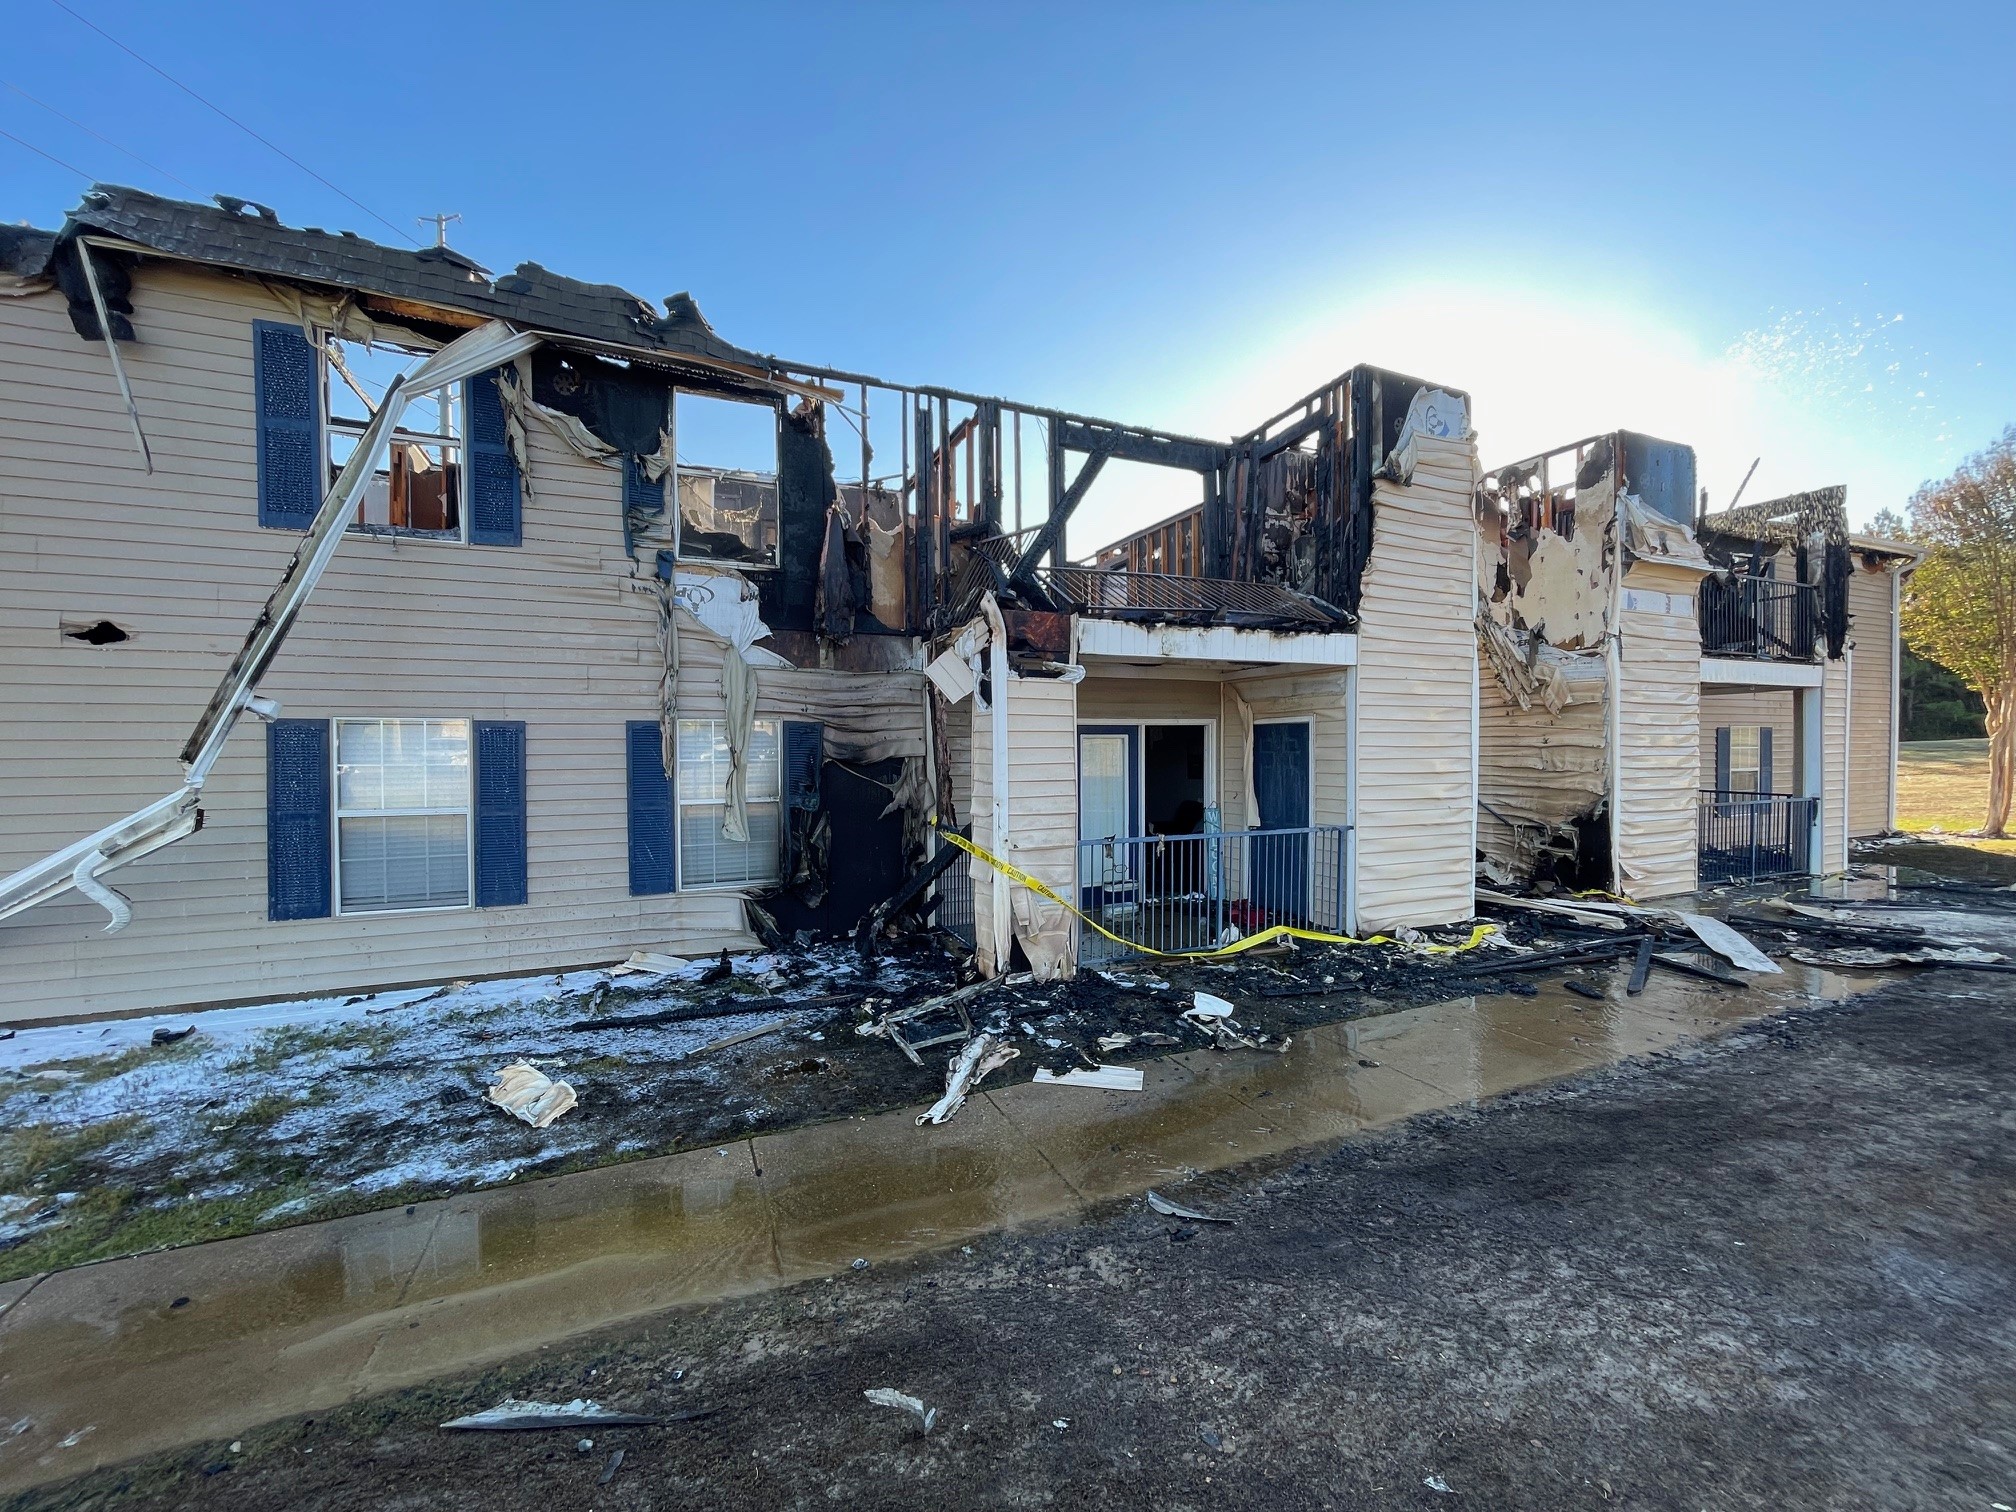 Eight Apartments in Pearl Destroyed in Overnight Fire